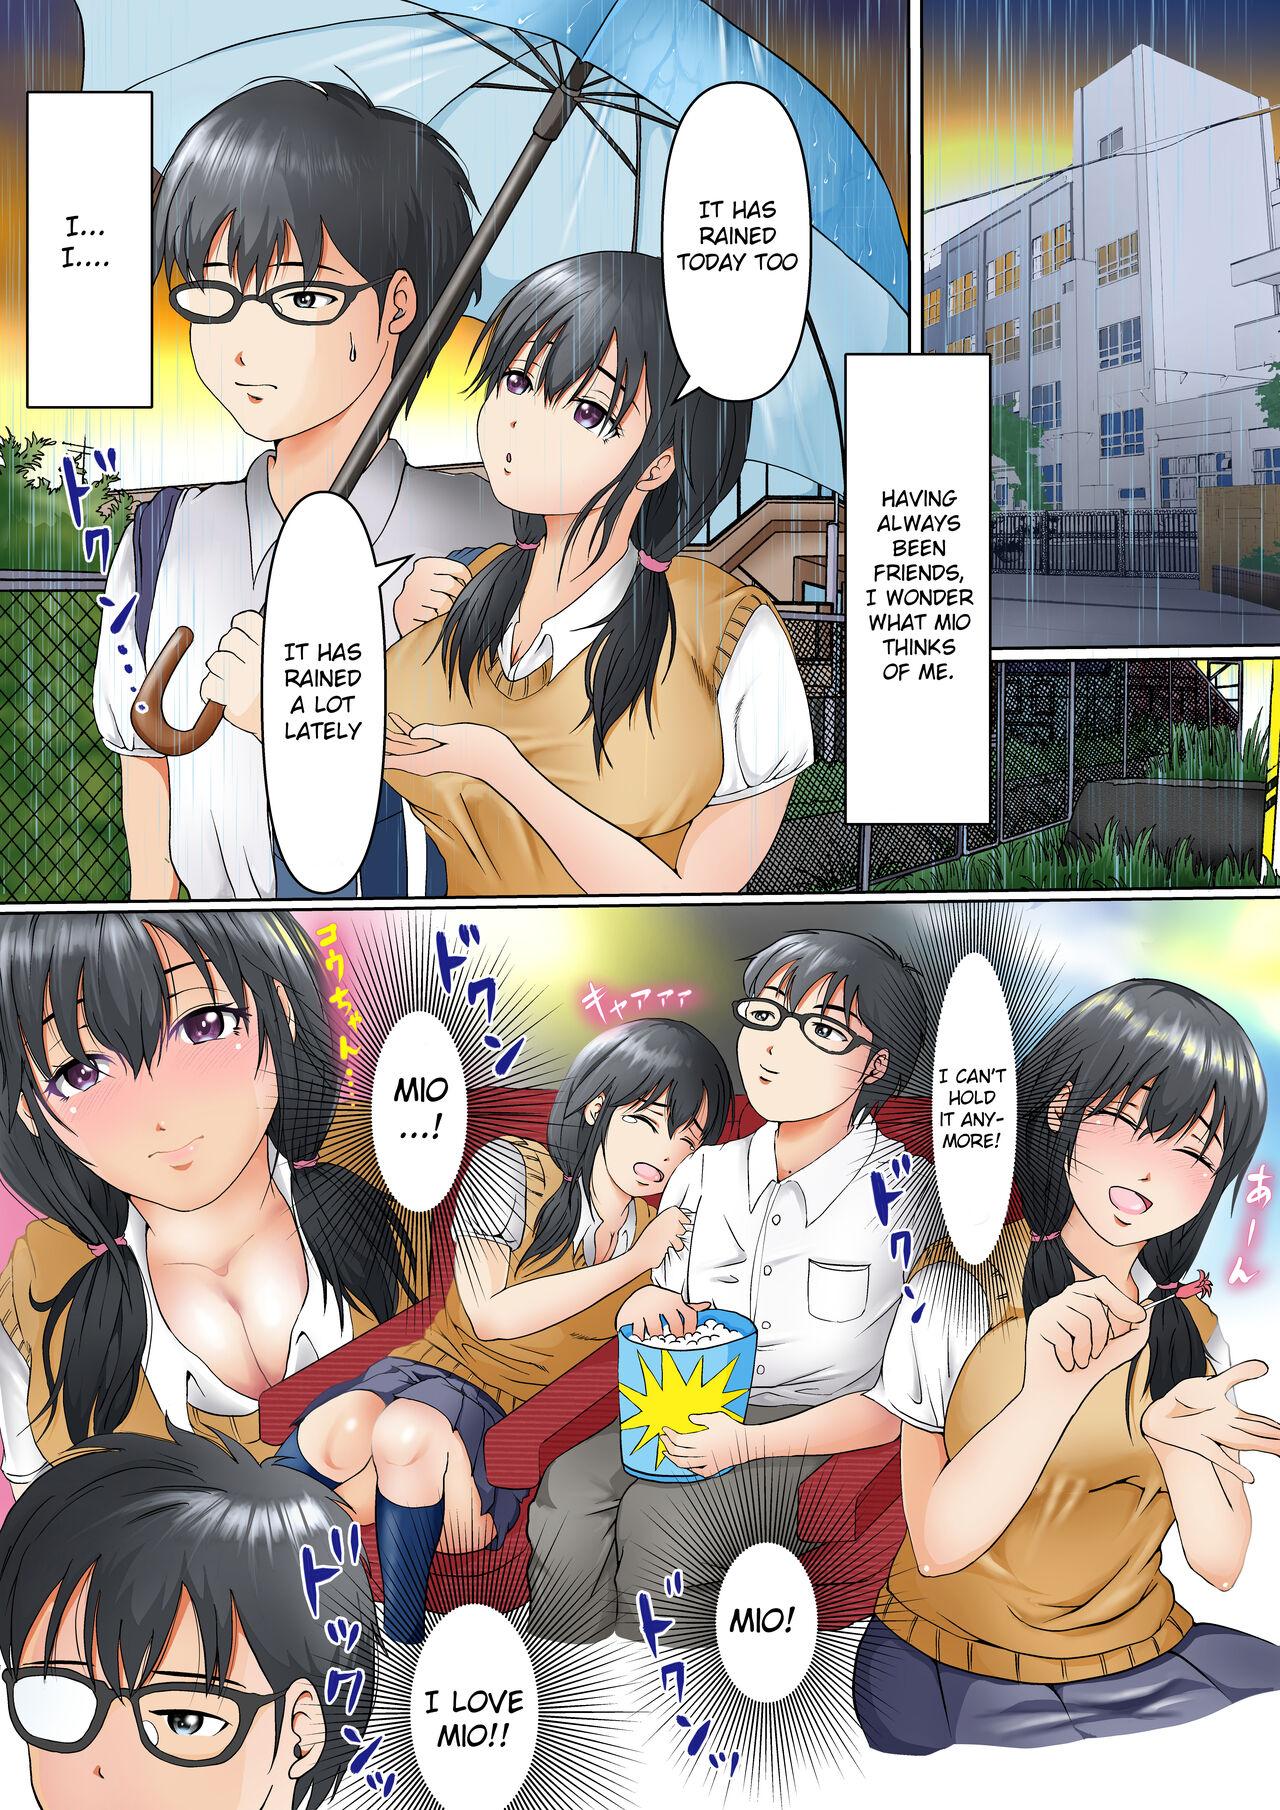 Double Penetration The reason why the bond with my childhood friend is broken so easily - Original Free - Page 11